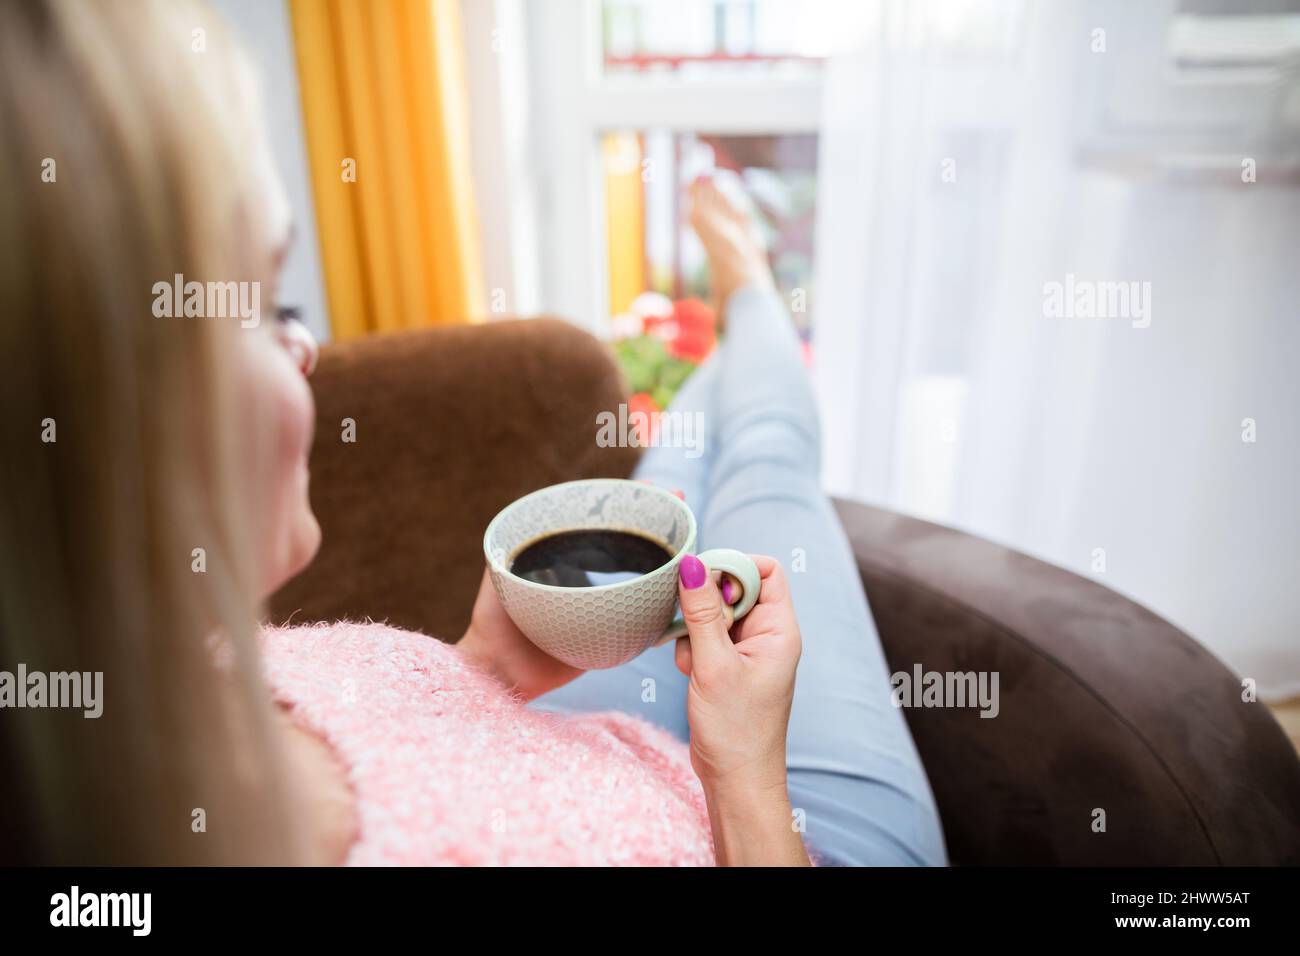 A blonde woman holds a cup of coffee while sitting in a chair. Stock Photo